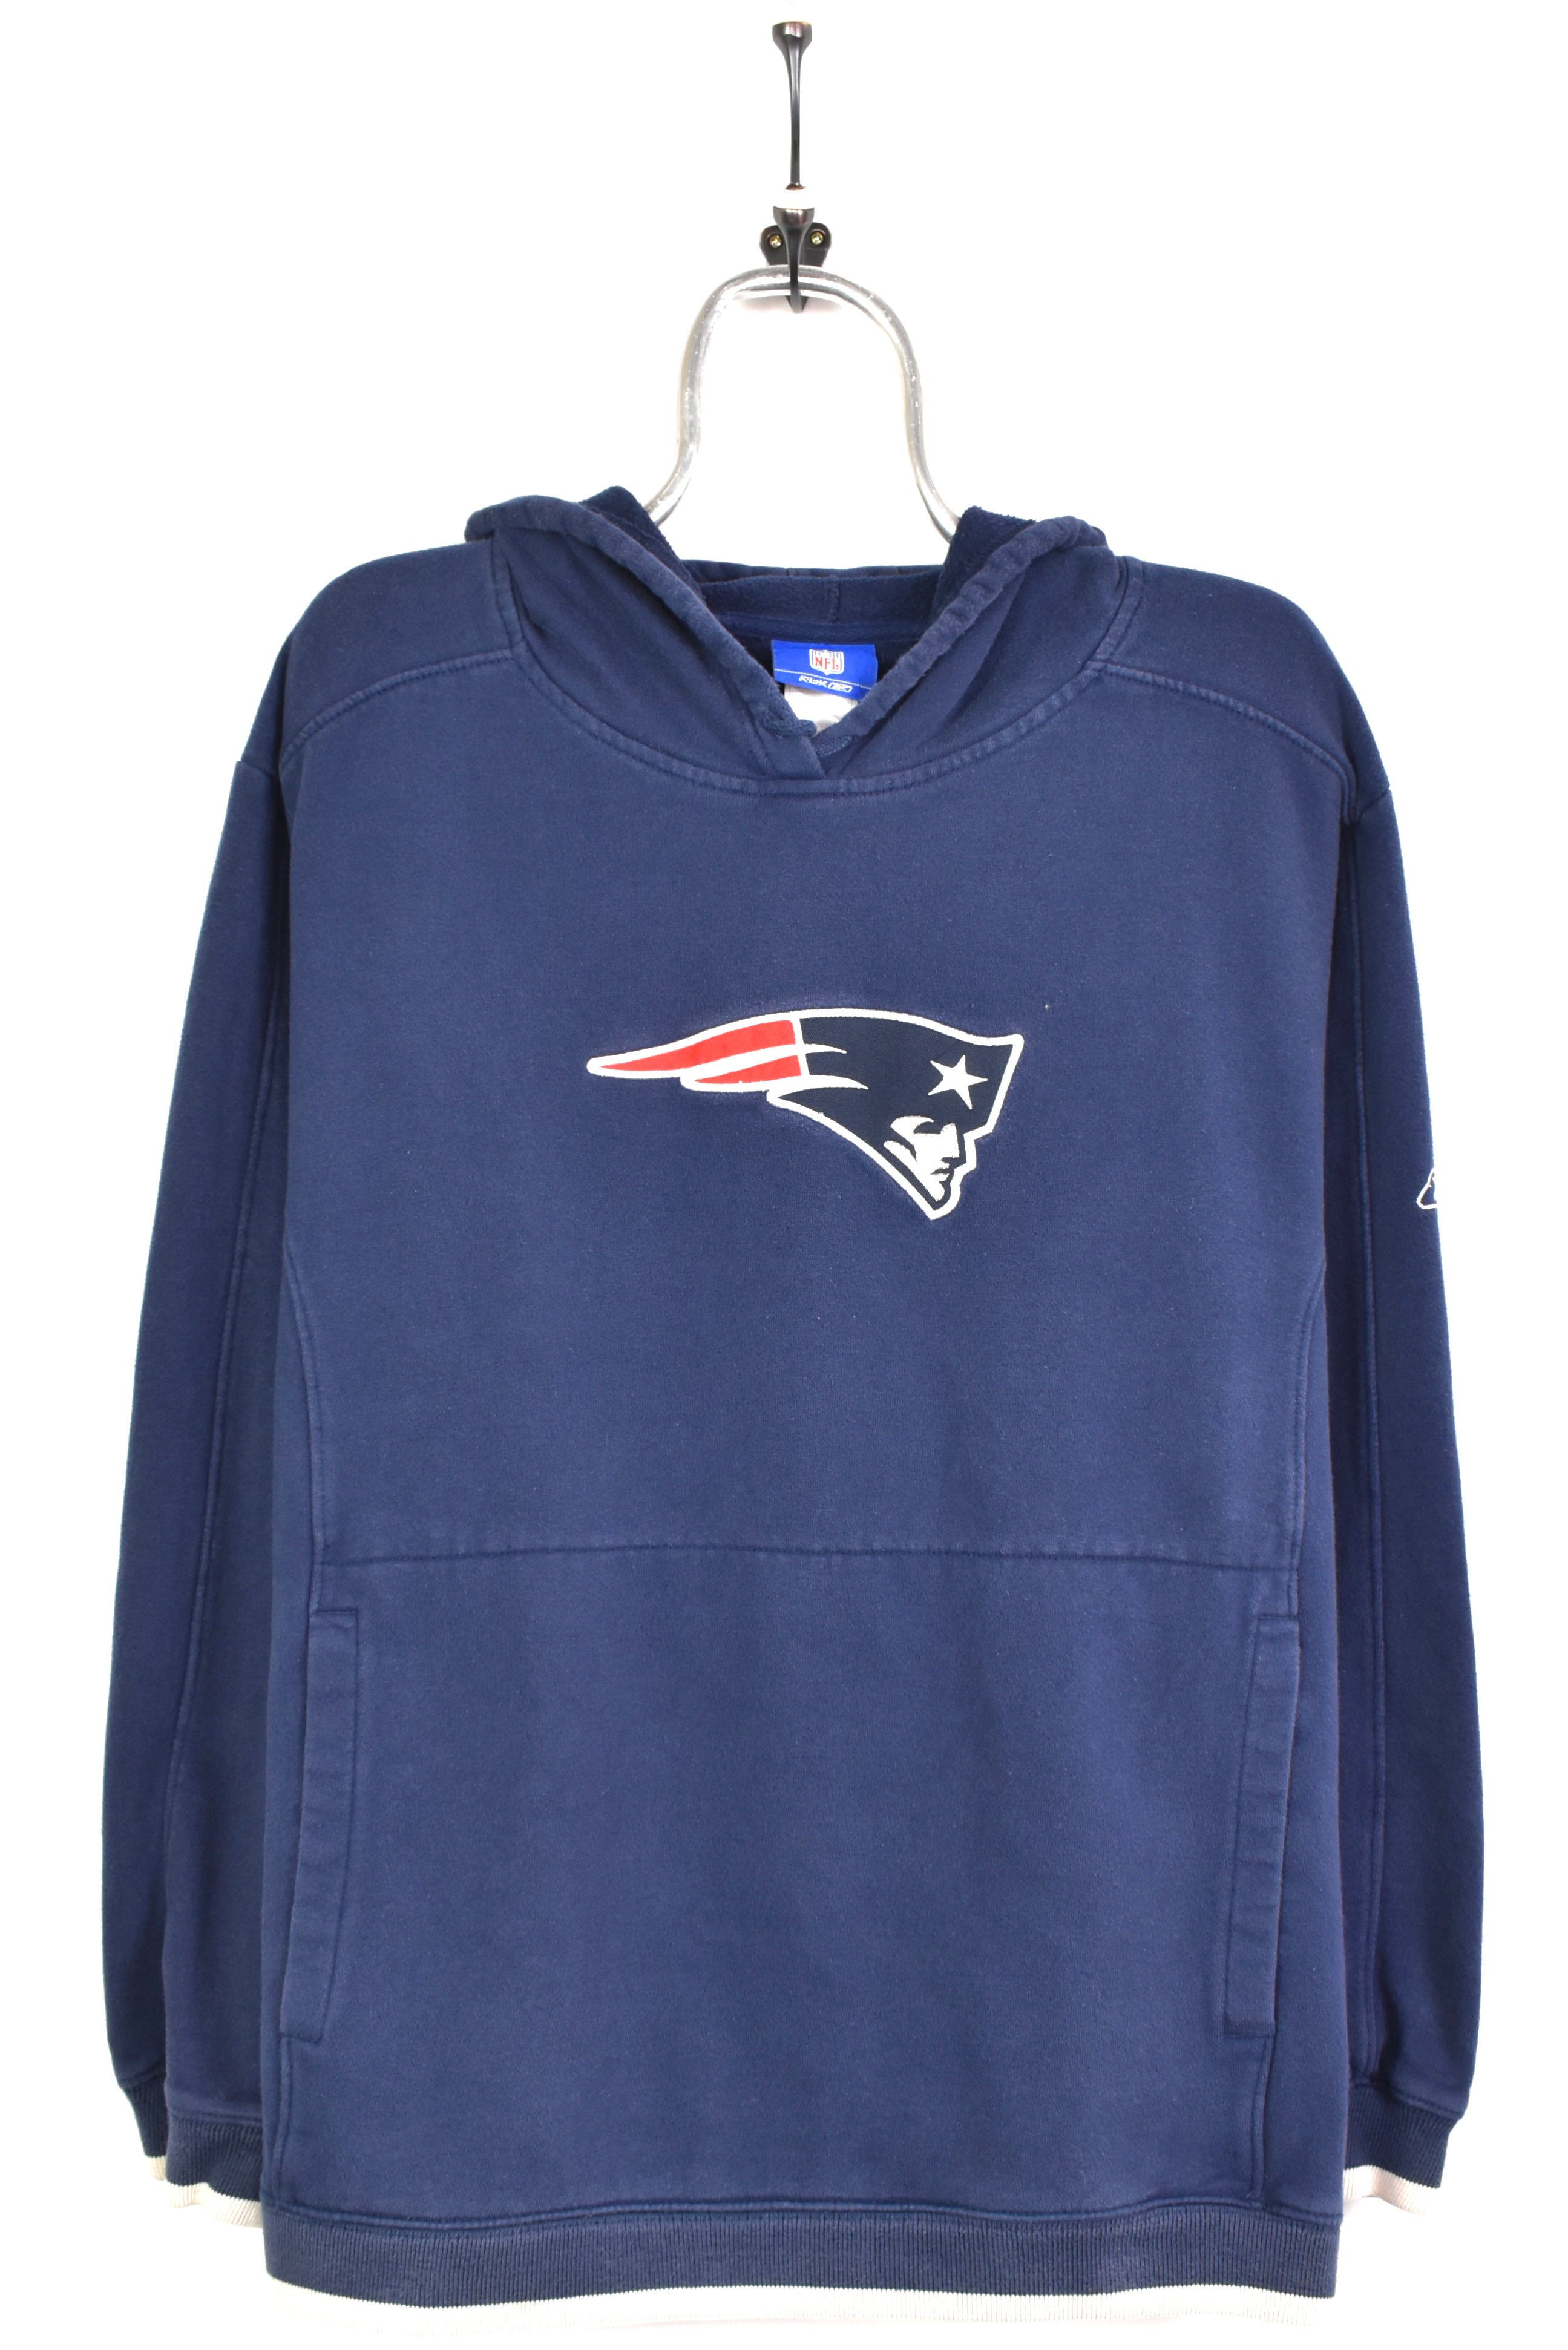 Vintage NFL New England Patriots embroidered navy hoodie | Large PRO SPORT